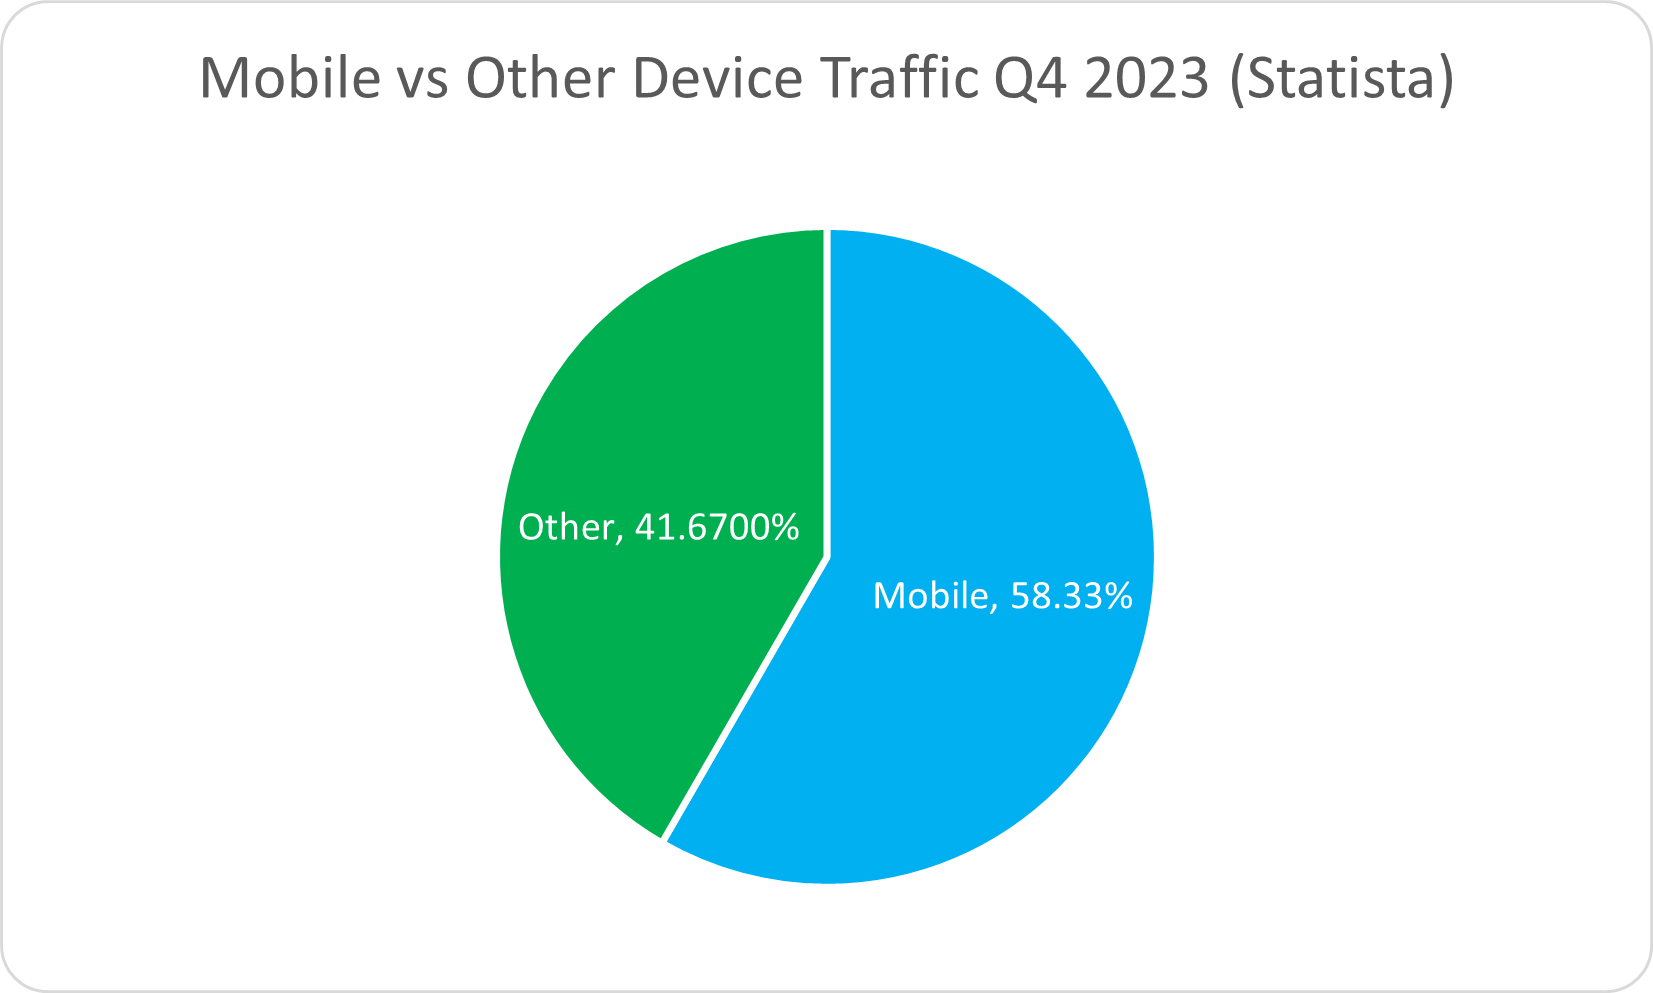 A pie chart showing that mobile accounts for 58.33% of web traffic.